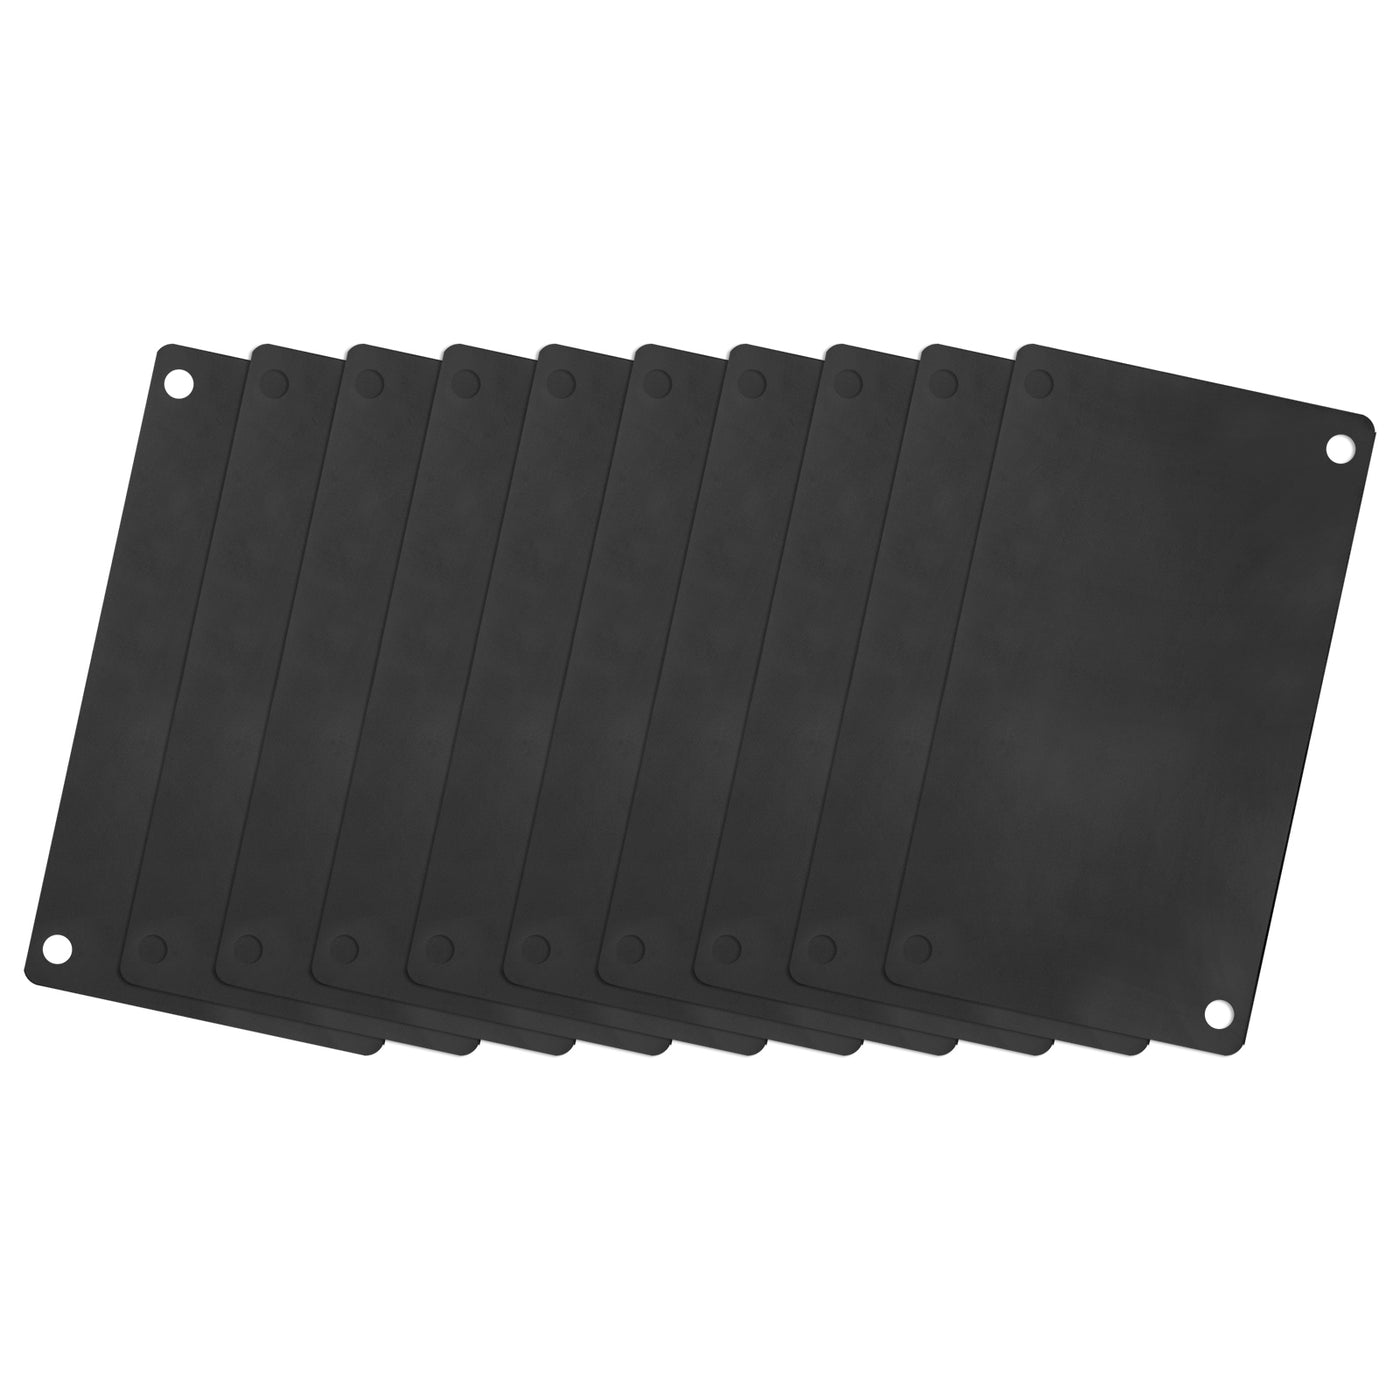 uxcell Uxcell 60x40mm Stainless Steel Blank Tags Engraving Blanks with 4 Hole, 10Pcs (Black)